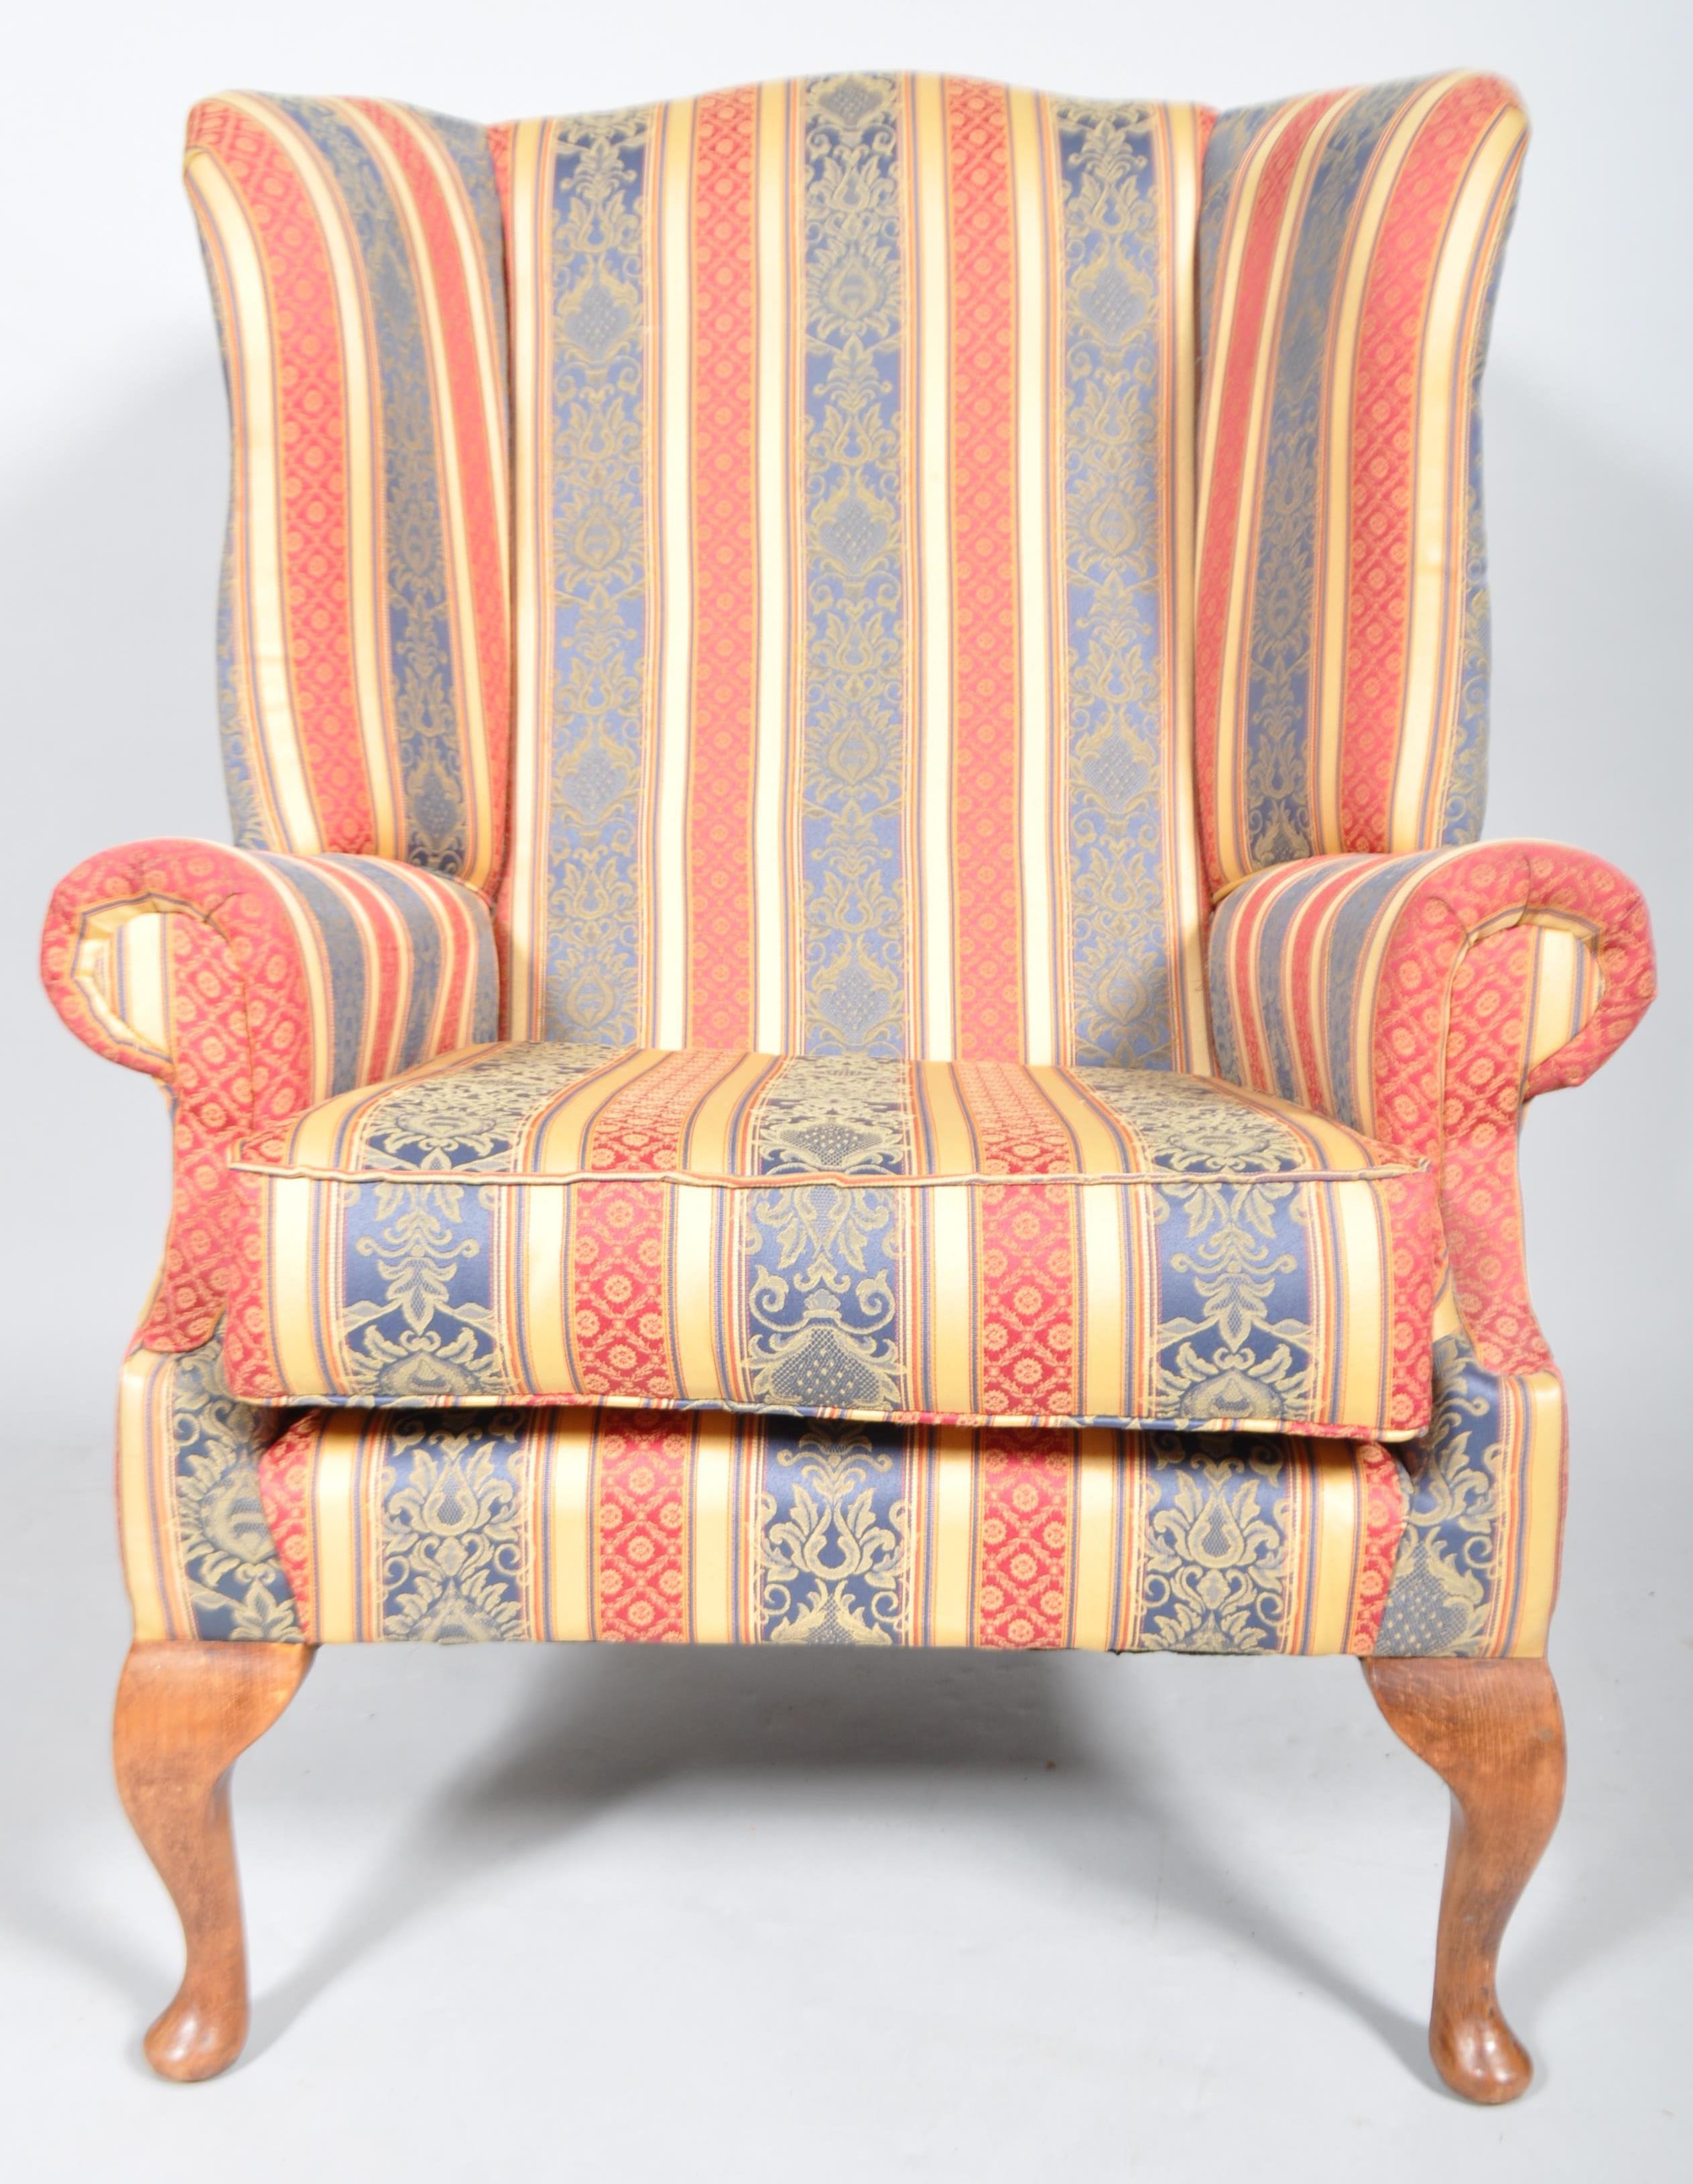 A 20th century Queen Anne style upholstered wing back armchair with barrel rolled arms, - Image 2 of 3